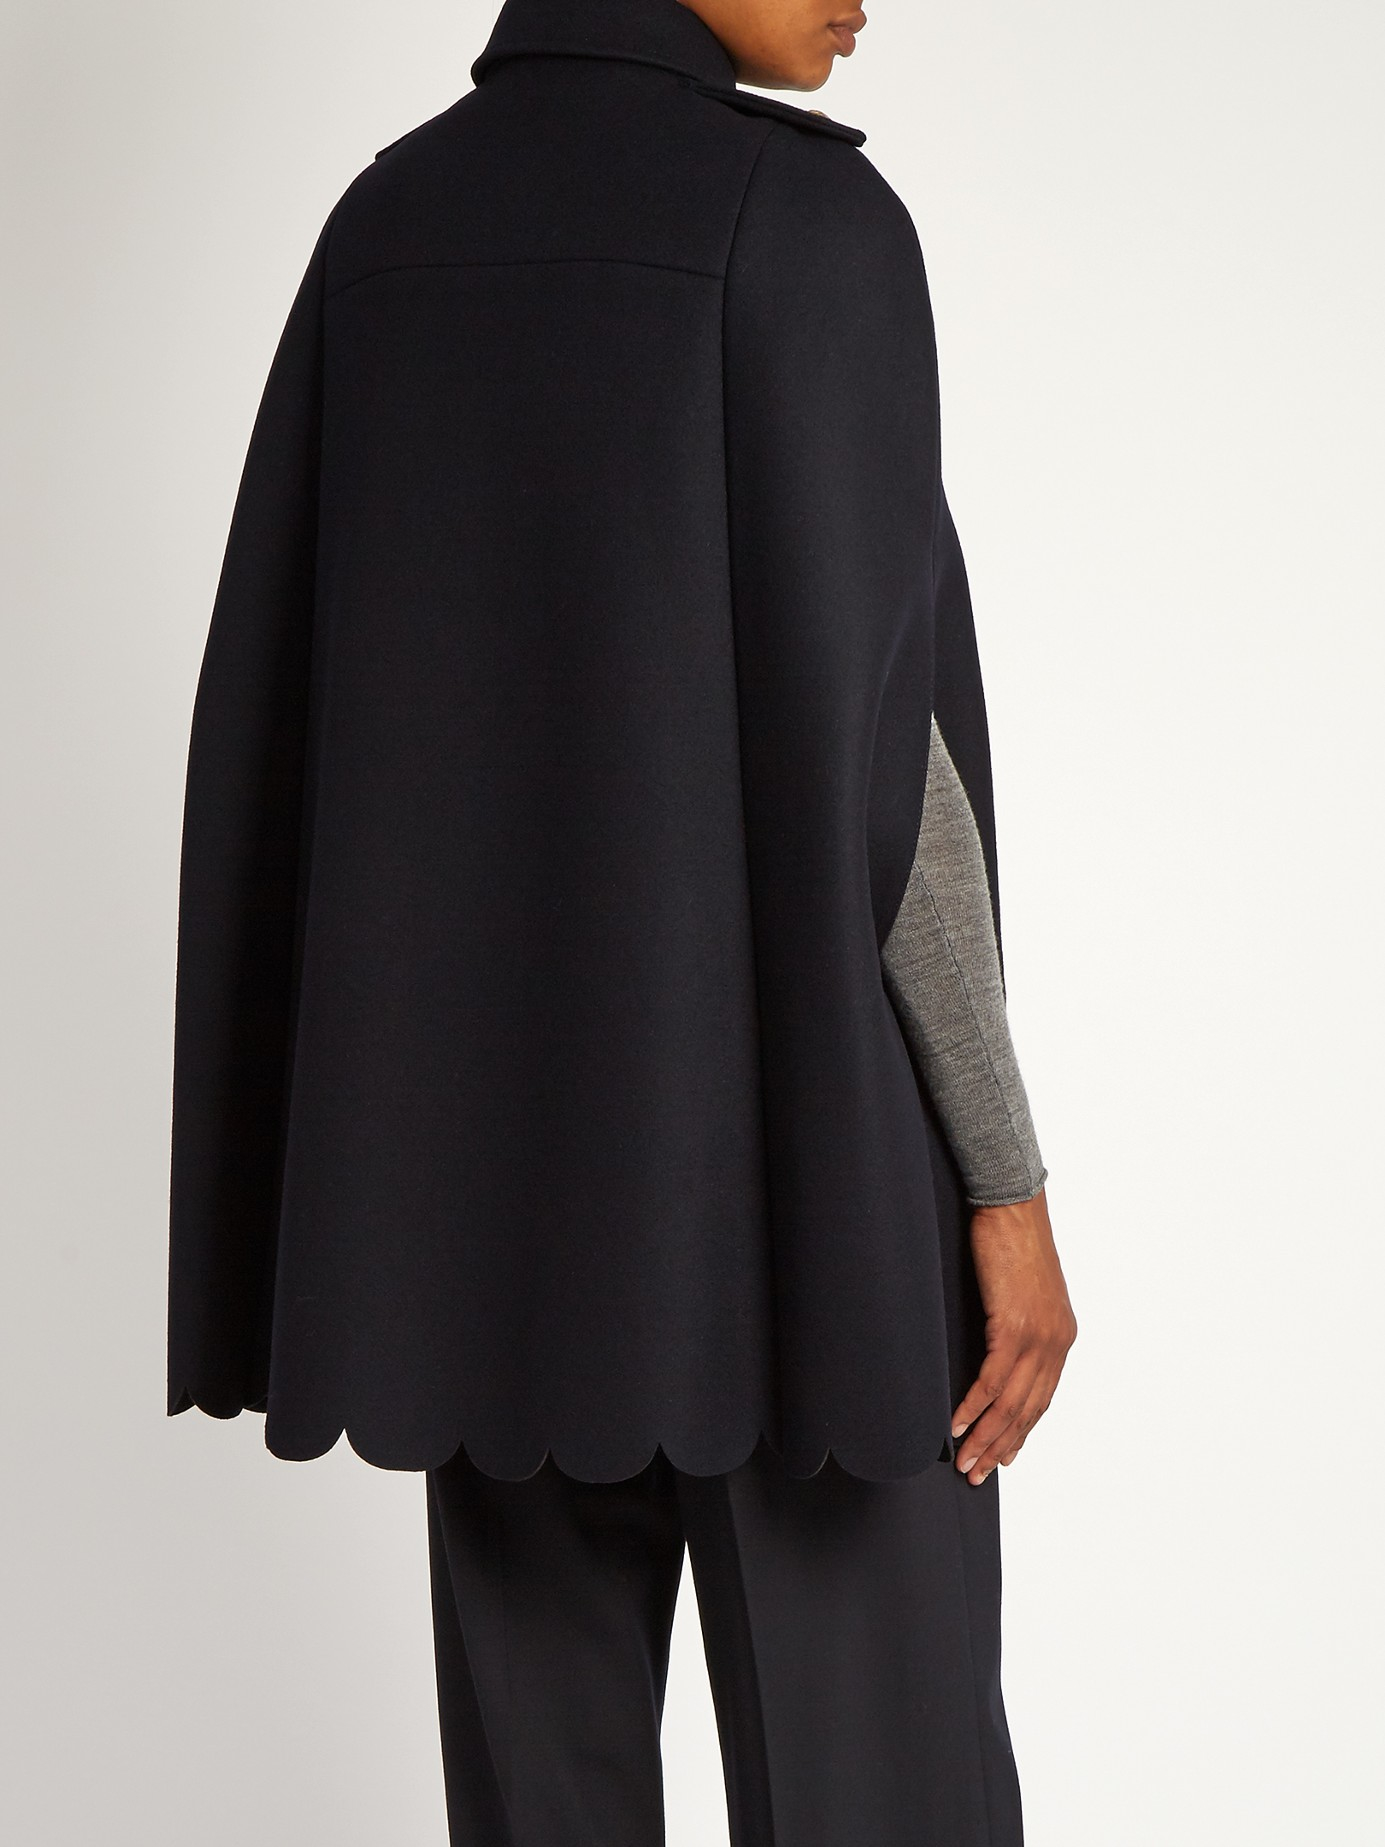 RED Valentino Wool Cape Coat in Navy (Blue) - Lyst